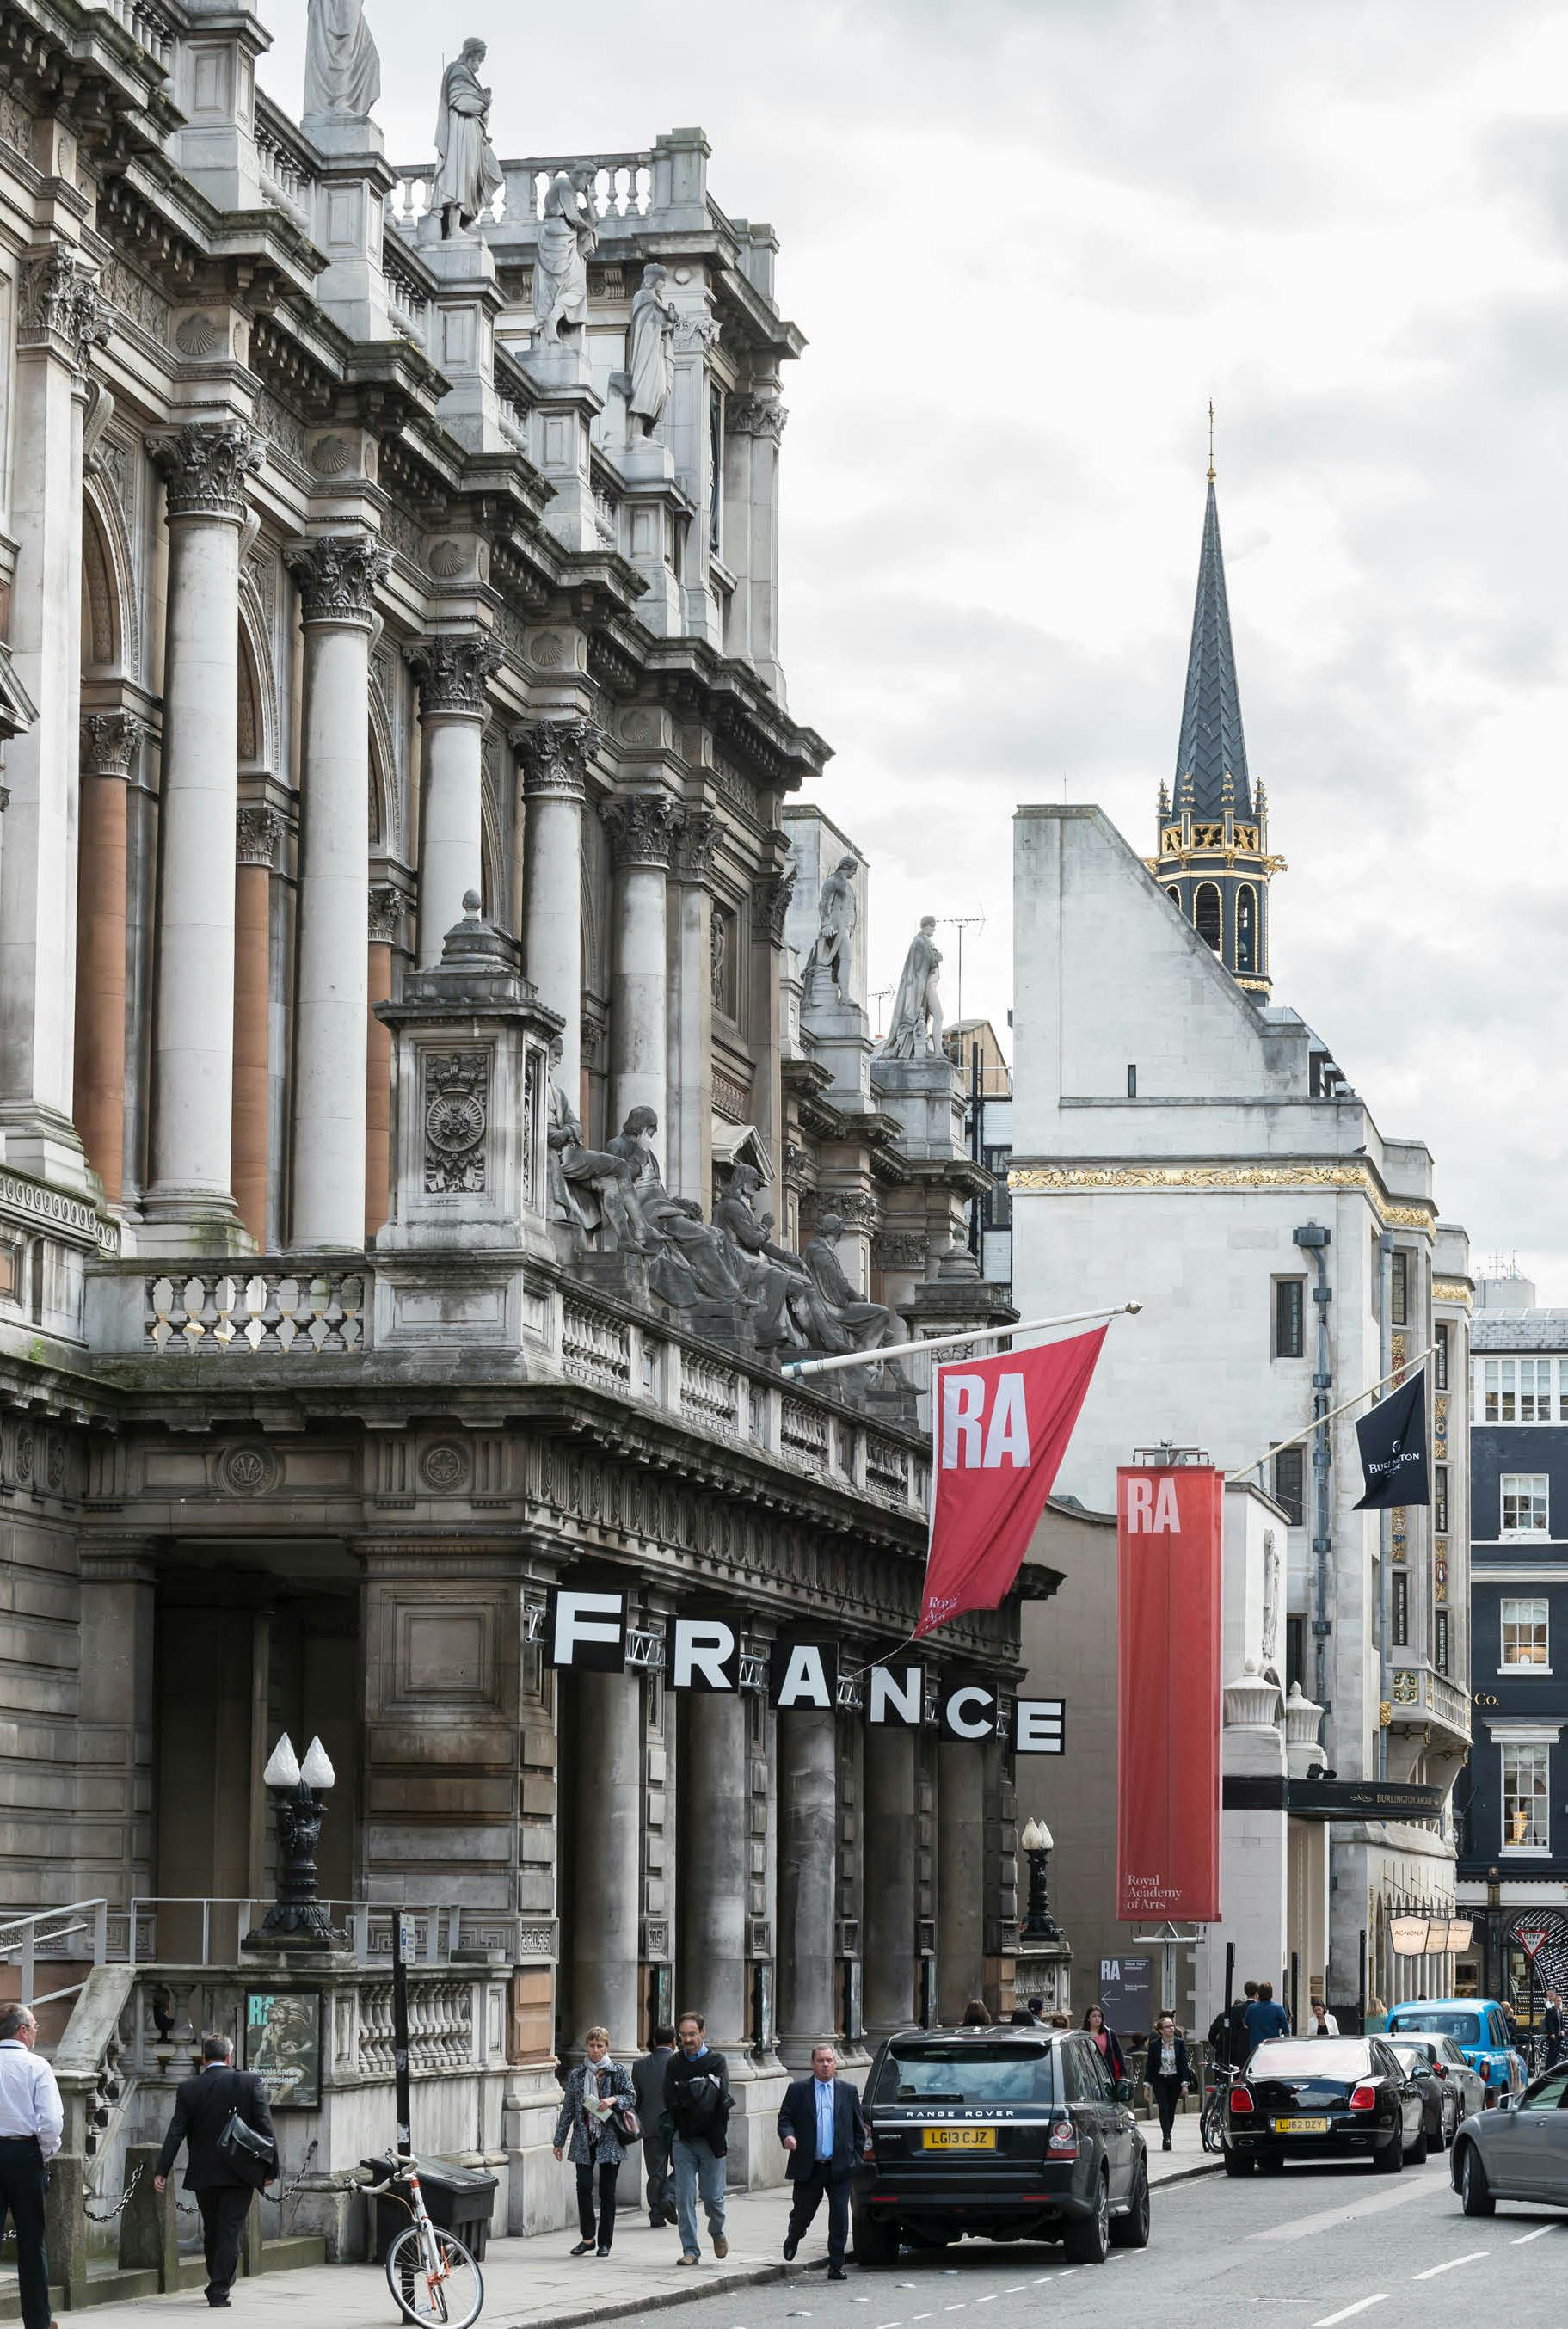 'Scrape' by UK artist Henry Coleman. Architectural installation of illuminated signage spelling out the word FRANCE attached to the facade of the RA building 6 Burlington Gardens, London, with red RA flags and banners in the background